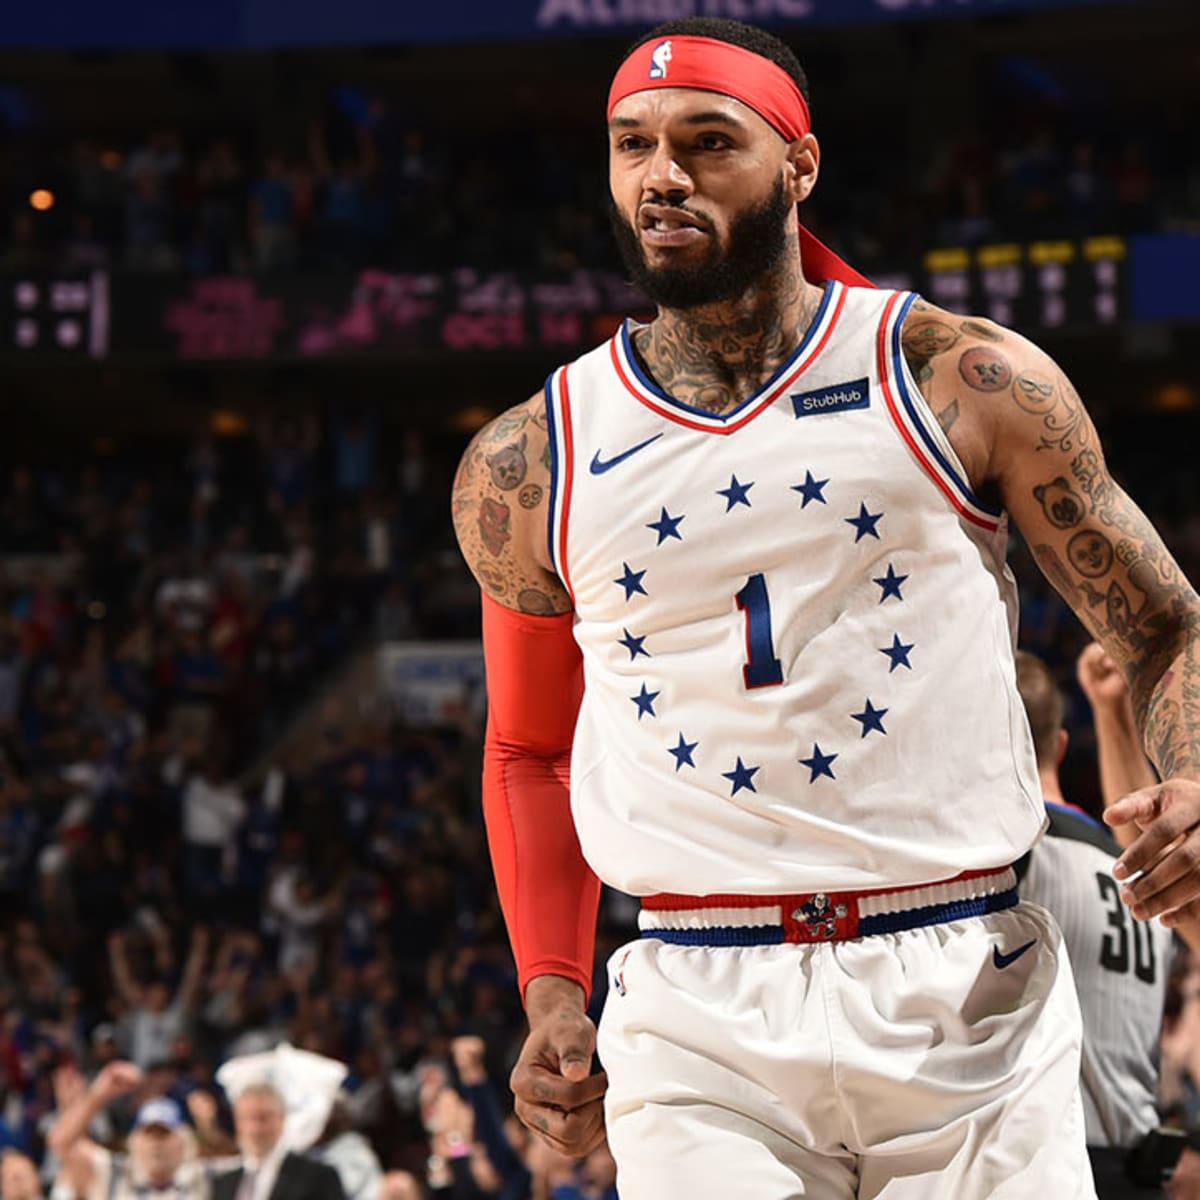 76ers' Mike Scott is going to start wearing local high school